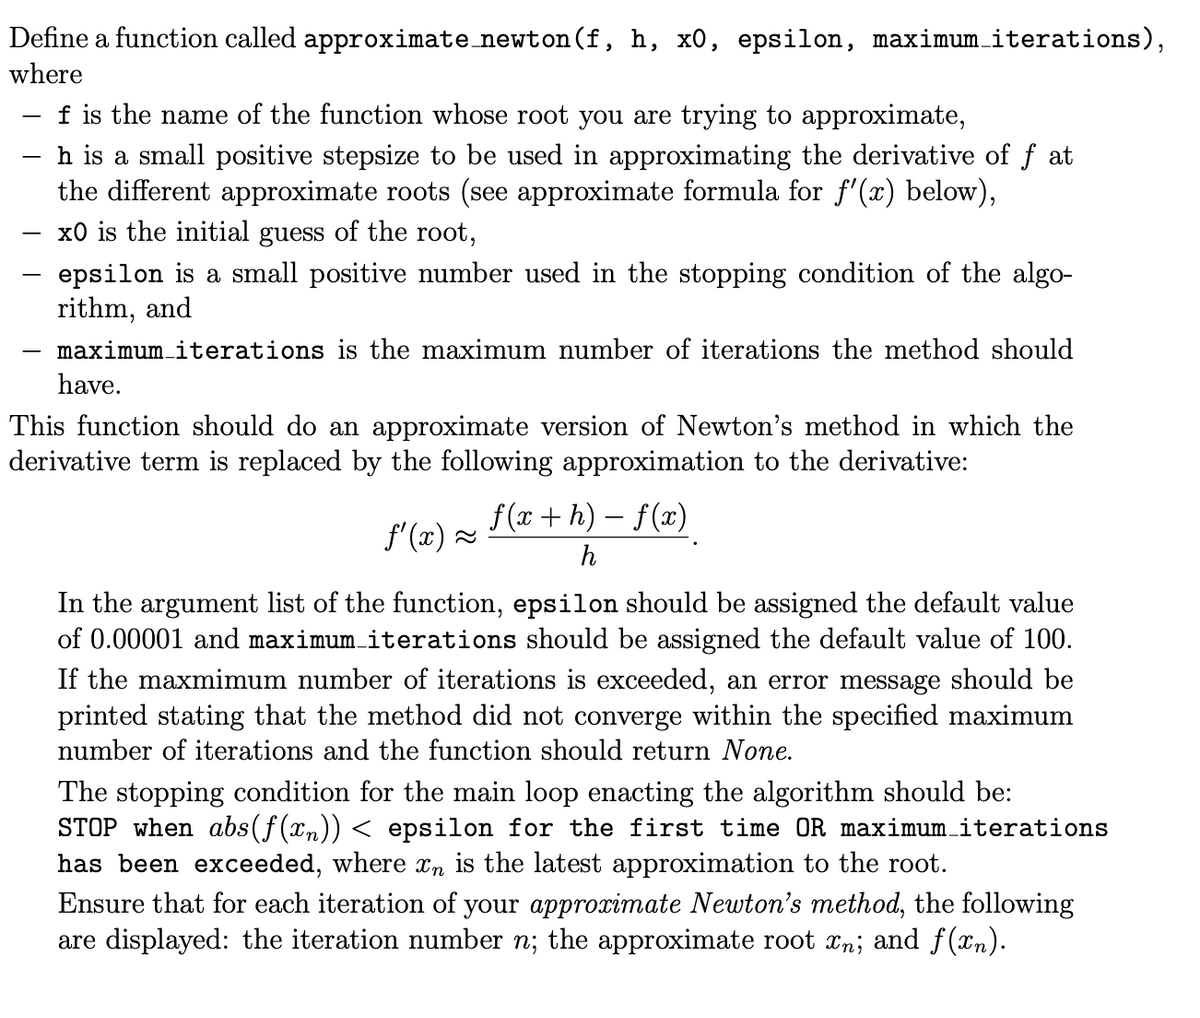 Define a function called approximate_newton(f, h, x0, epsilon, maximum_iterations),
where
f is the name of the function whose root you are trying to approximate,
h is a small positive stepsize to be used in approximating the derivative of f at
the different approximate roots (see approximate formula for f'(x) below),
x0 is the initial guess of the root,
epsilon is a small positive number used in the stopping condition of the algo-
rithm, and
maximum iterations is the maximum number of iterations the method should
have.
This function should do an approximate version of Newton's method in which the
derivative term is replaced by the following approximation to the derivative:
-
f(x + h) − f (x)
h
ƒ'(x)≈
In the argument list of the function, epsilon should be assigned the default value
of 0.00001 and maximum_iterations should be assigned the default value of 100.
If the maxmimum number of iterations is exceeded, an error message should be
printed stating that the method did not converge within the specified maximum
number of iterations and the function should return None.
The stopping condition for the main loop enacting the algorithm should be:
STOP when abs (f(xn)) < epsilon for the first time OR maximum_iterations
has been exceeded, where în is the latest approximation to the root.
Ensure that for each iteration of your approximate Newton's method, the following
are displayed: the iteration number n; the approximate root xn; and f(xn).